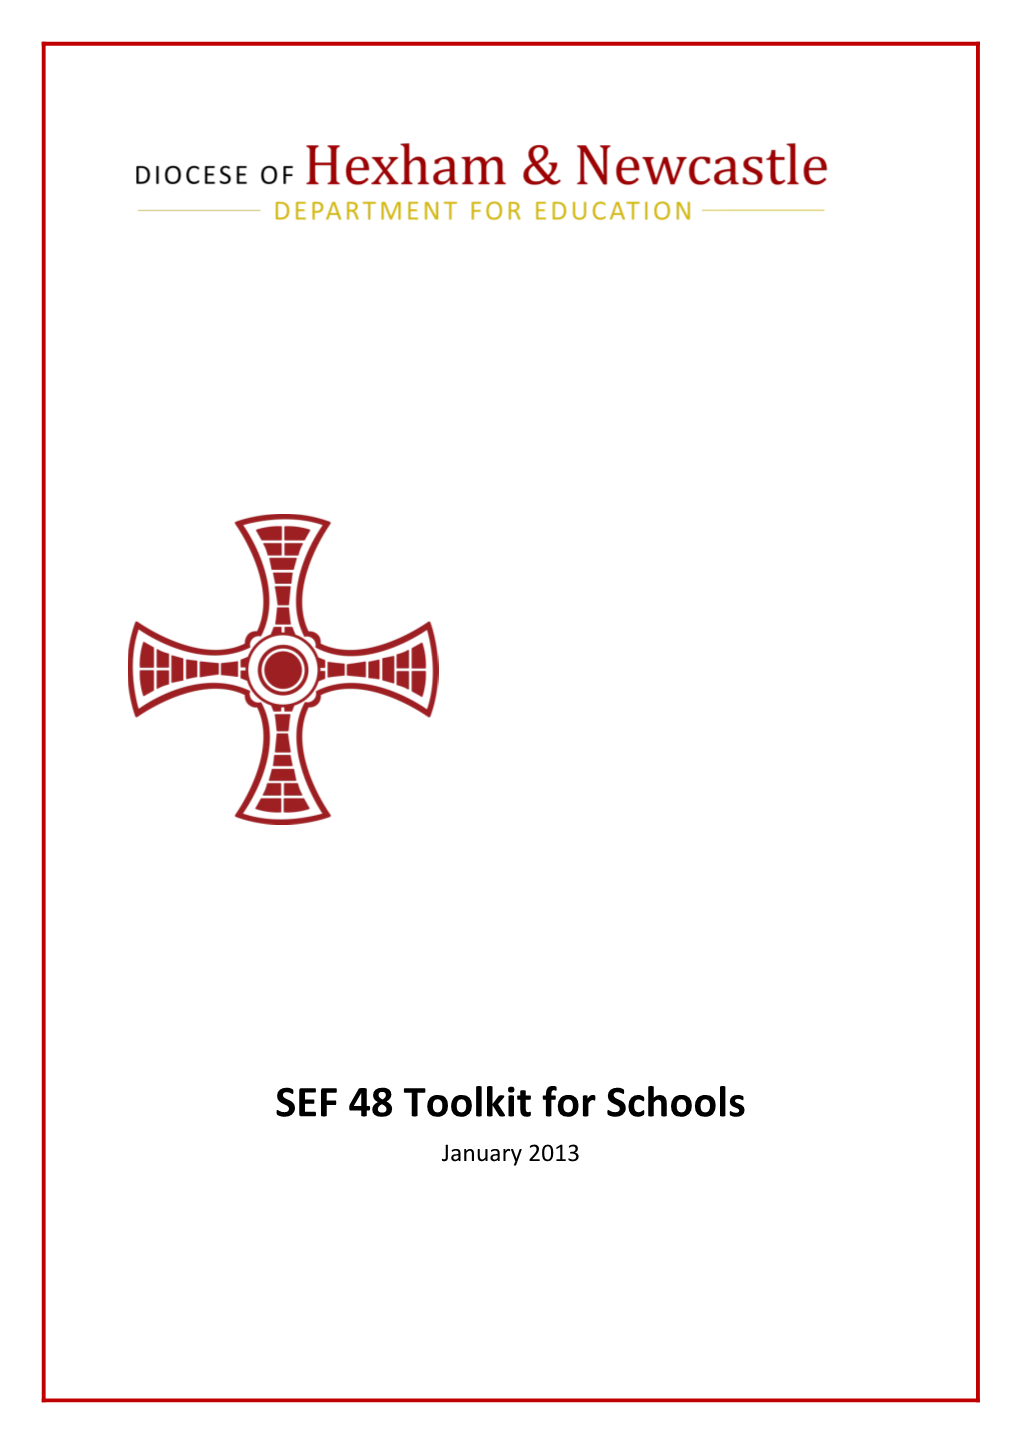 SEF 48 Toolkit for Schools